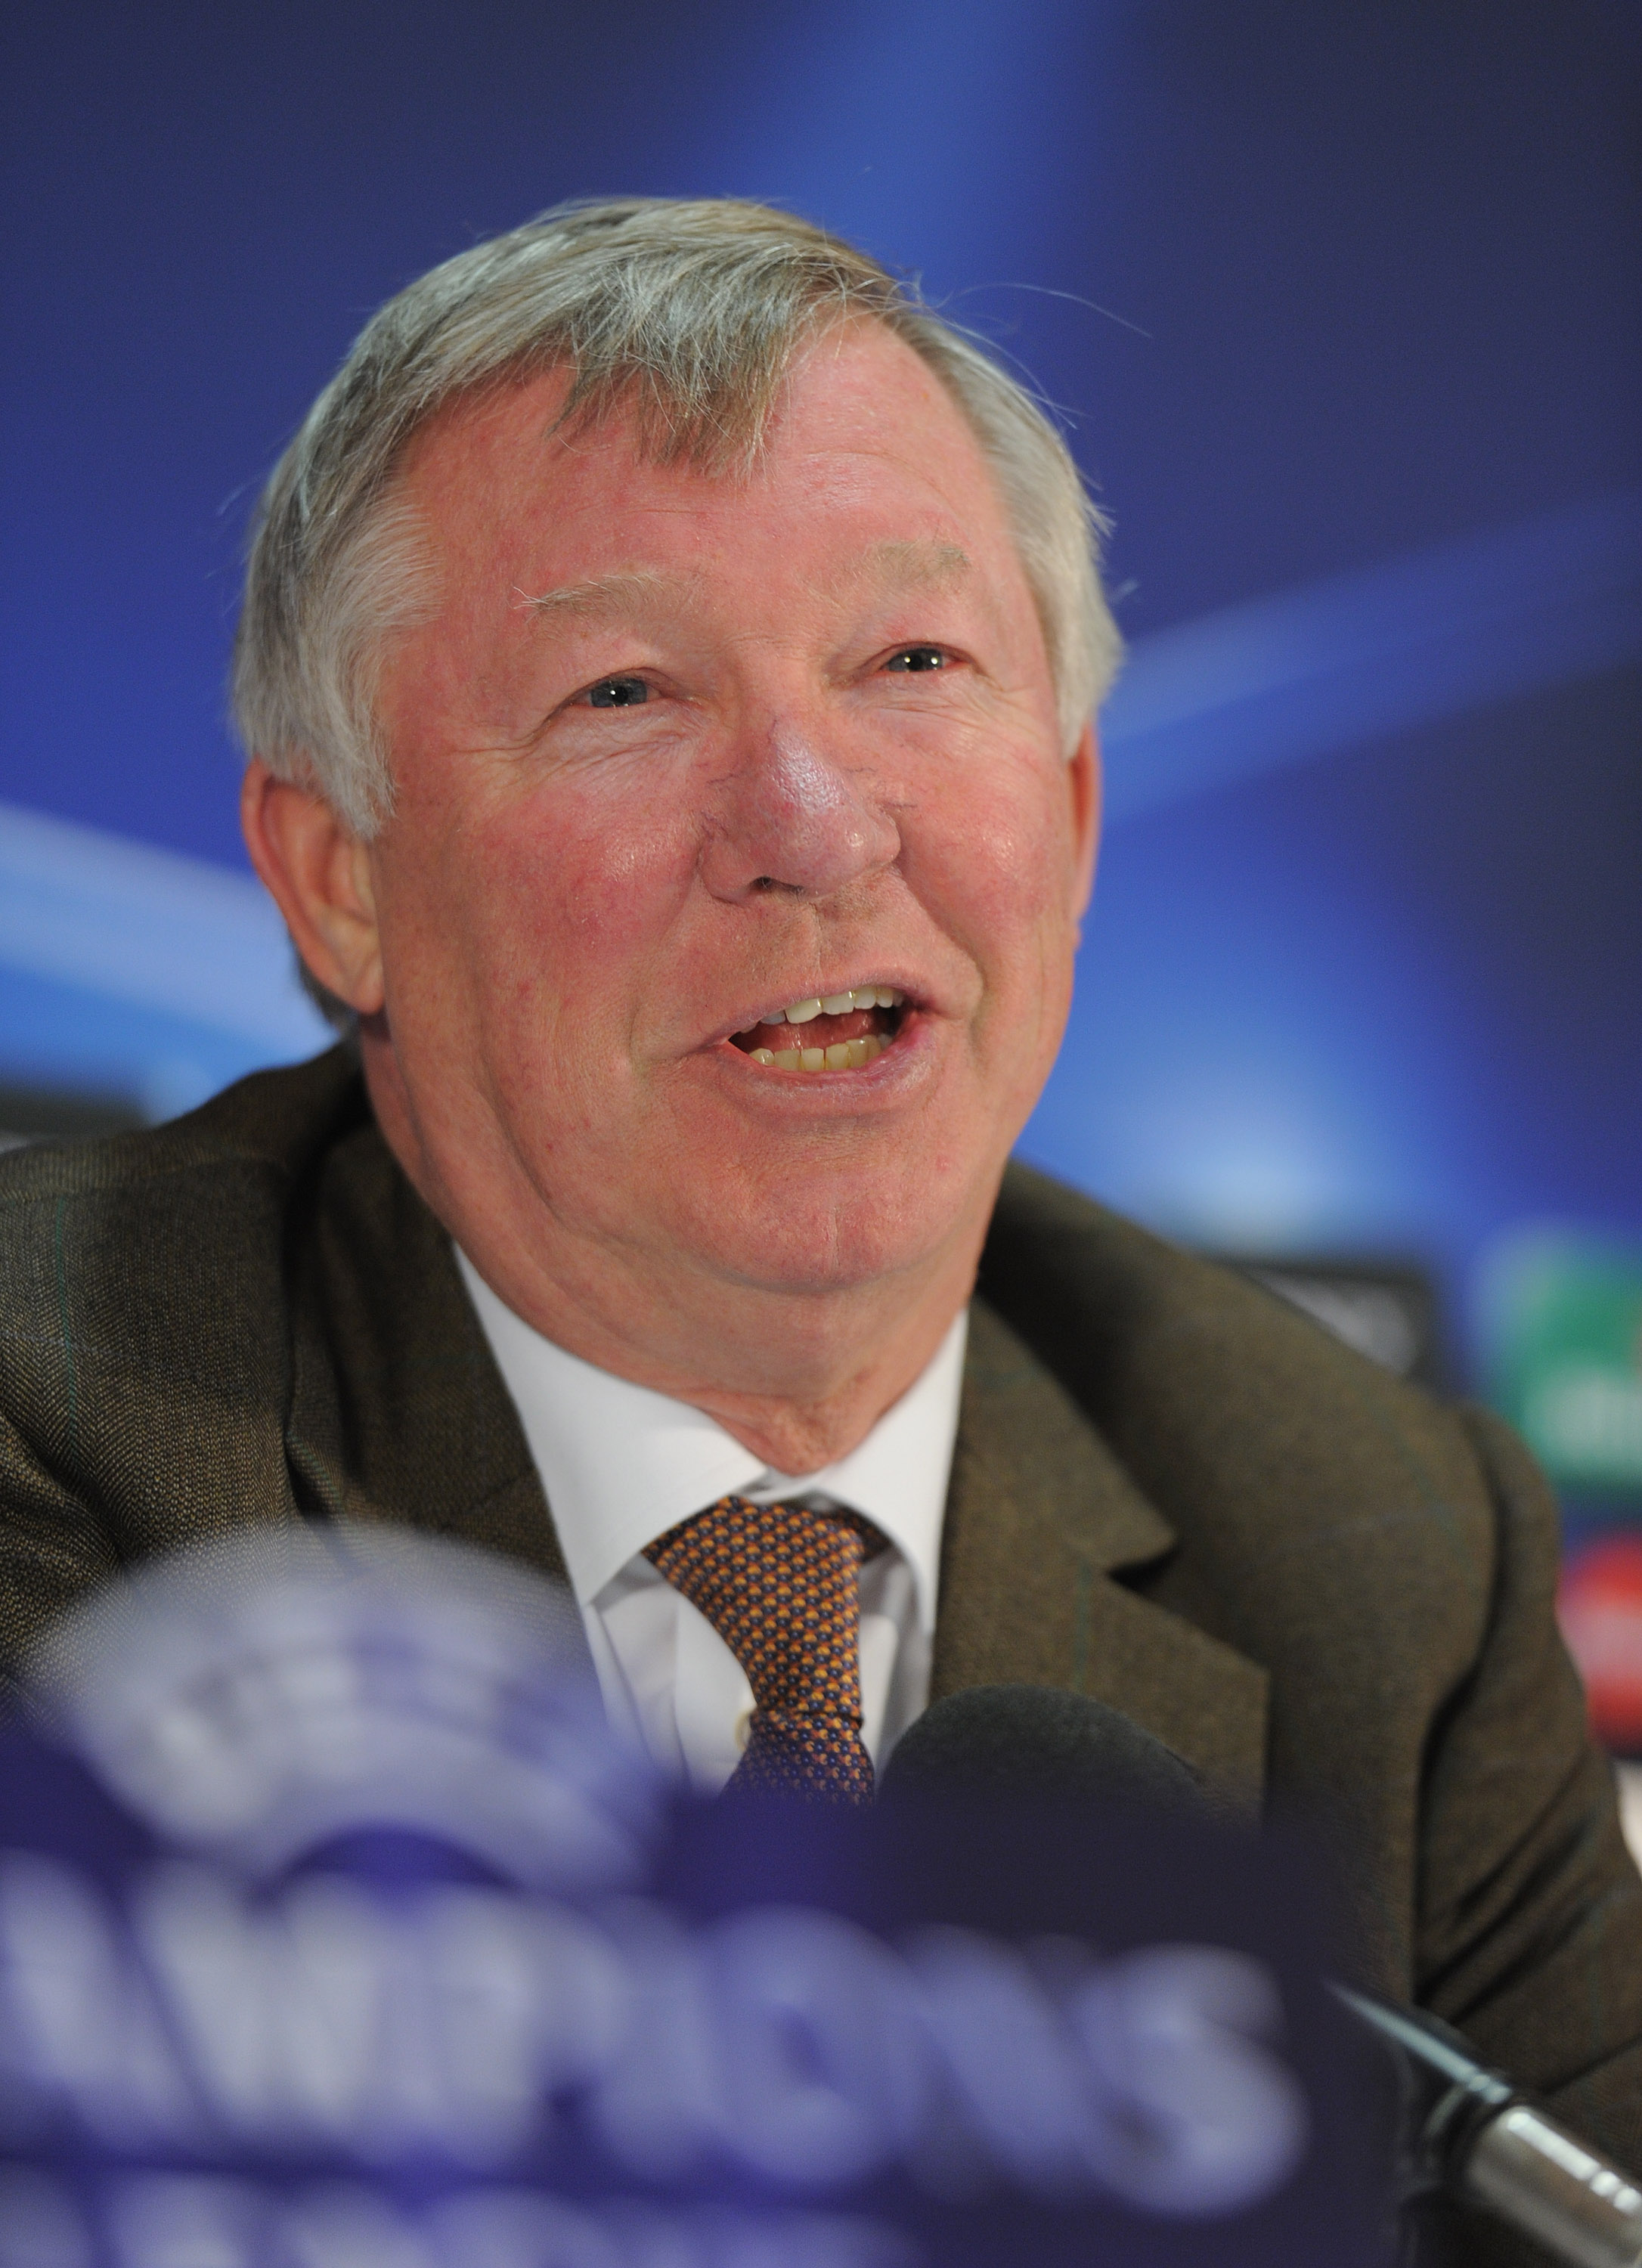 MANCHESTER, ENGLAND - MAY 03:  Sir Alex Ferguson speaks to the media during a press conference ahead of their UEFA Champions League semi final second leg match against Schalke 04 at the Carrington Training Ground on May 3, 2011 in Manchester, England.  (P